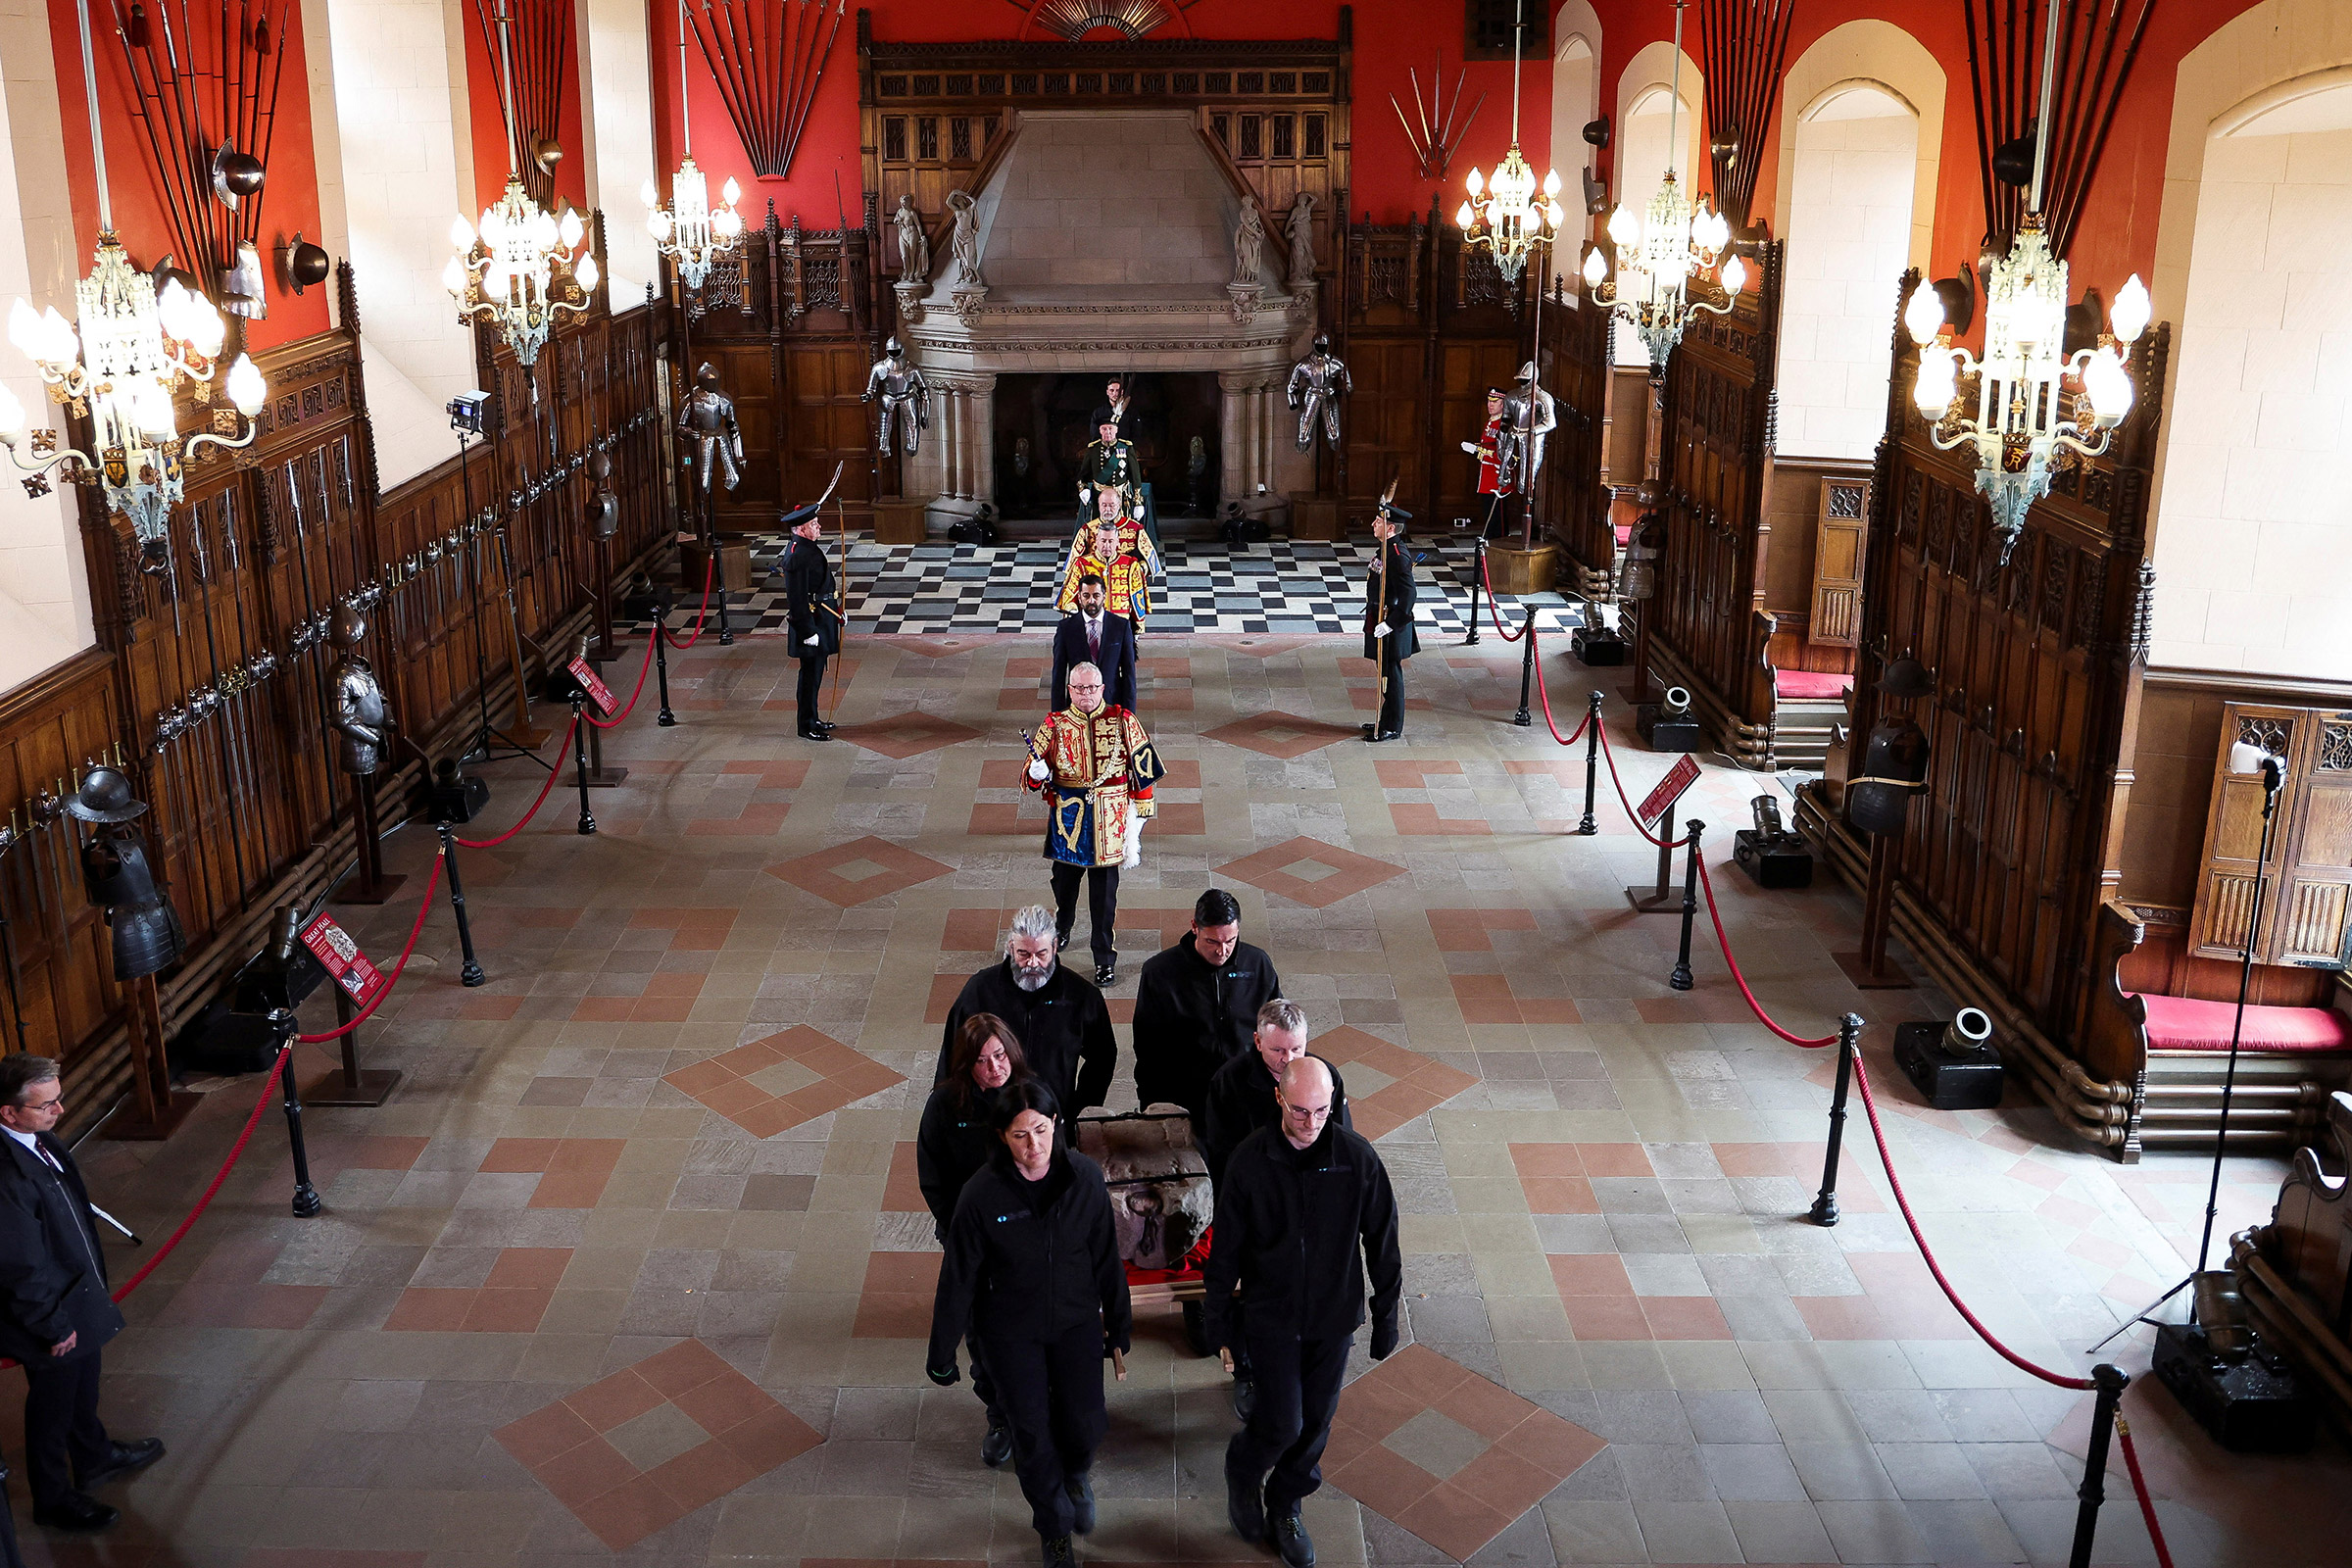 The Stone of Destiny is carried out of the Great Hall in Edinburgh Castle before onward transportation to Westminster Abbey for the Coronation of King Charles III, on April 27.